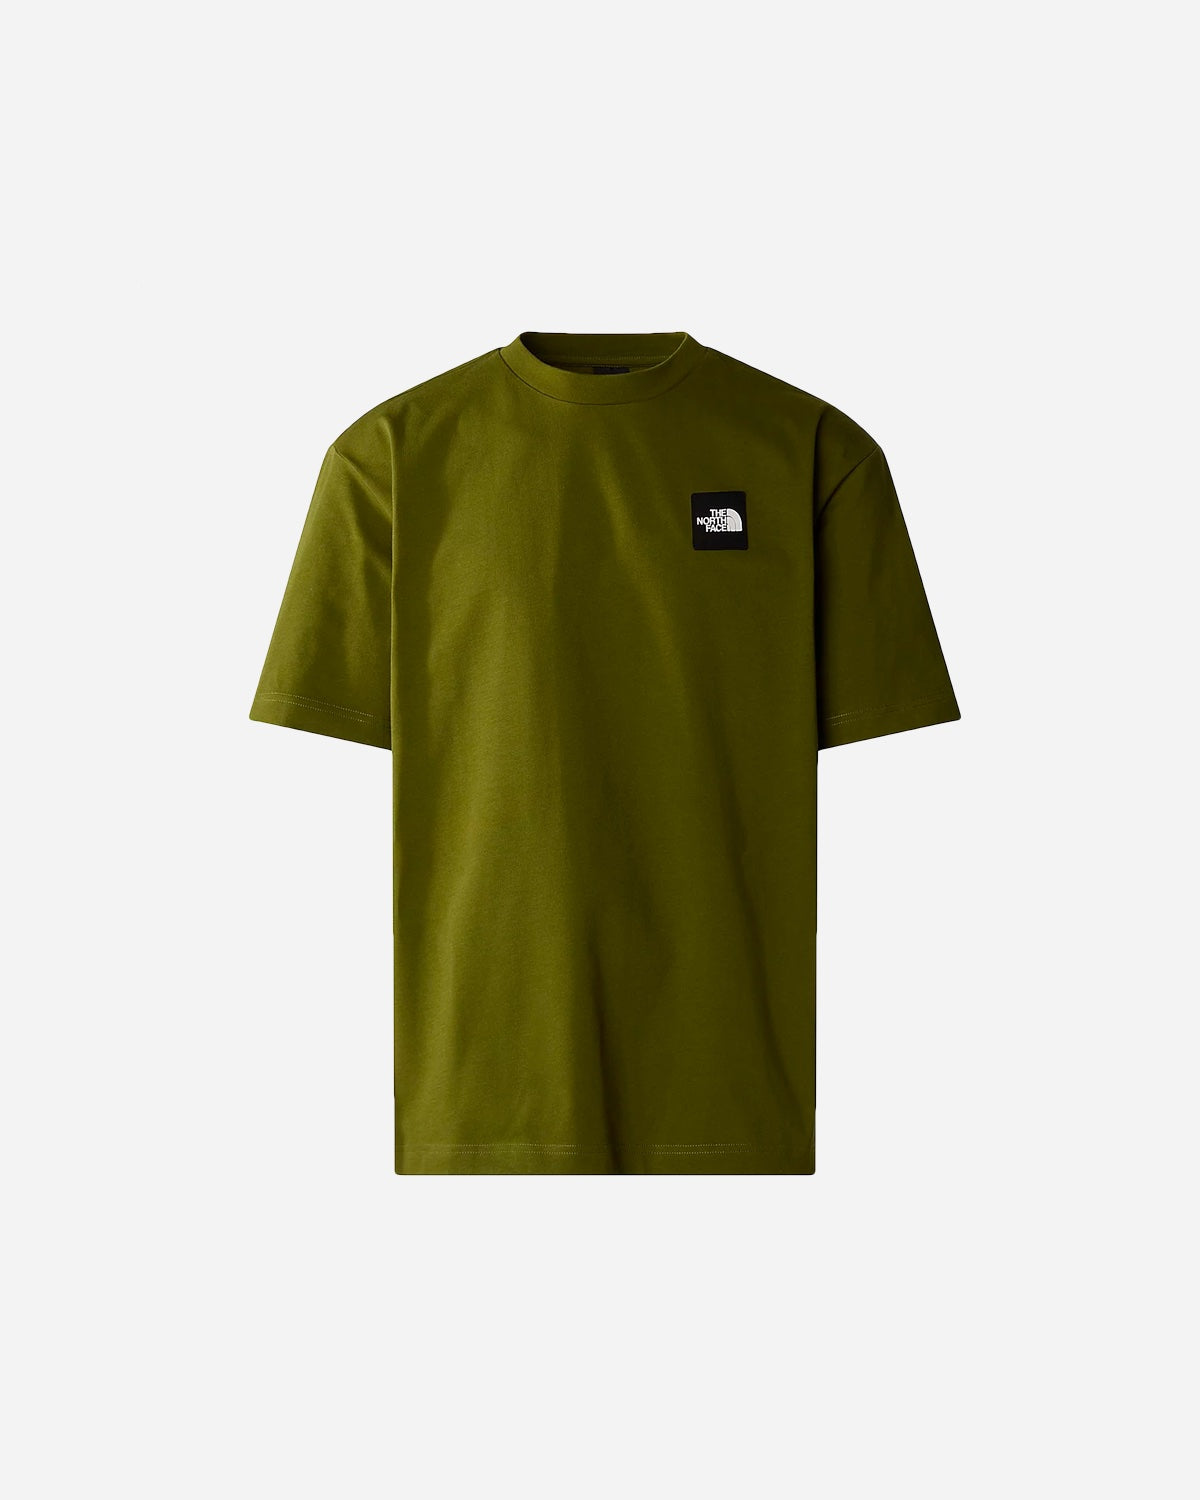 M NSE Patch S/S Tee - Forest Olive